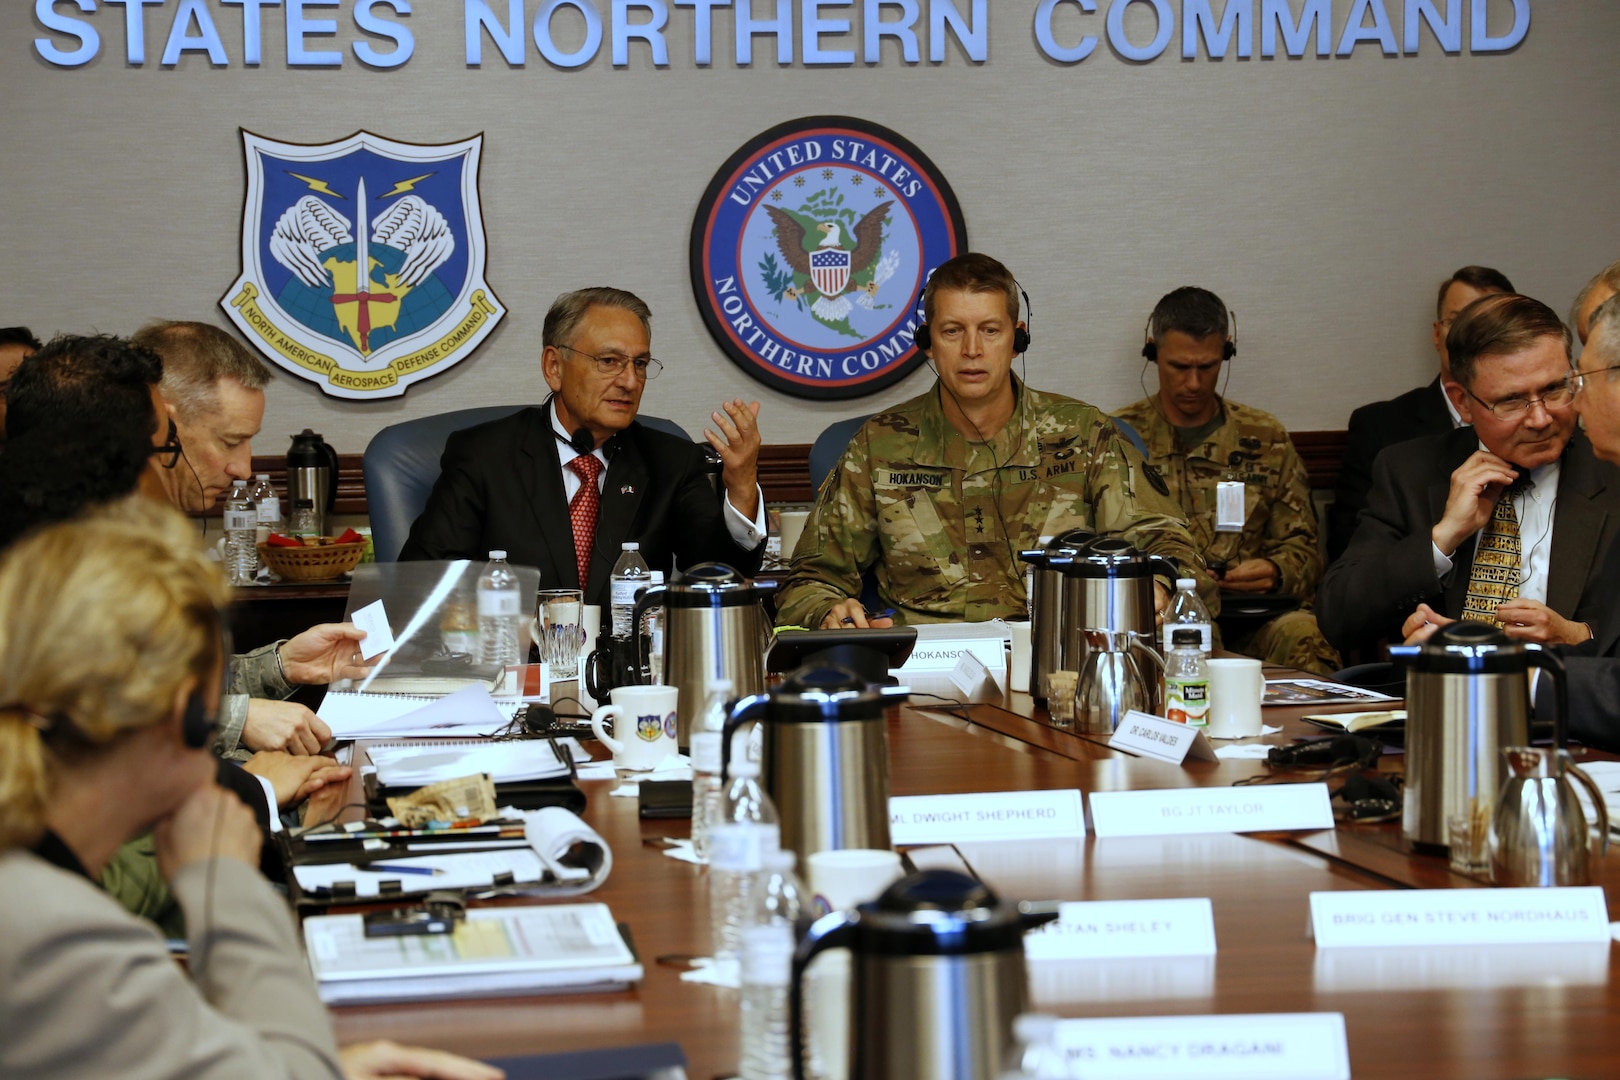 Mr. Luis Felipe Puente (left), Mexico's National Coordinator for Civil Protection, discussed disaster response and preparation with LTG Daniel R.
Hokanson (right), USNORTHCOM Deputy Commander, and command staff April 13, 2016. Mr. Puente also briefed the group about Mexico's successful preparation and response to Hurricane Patricia, which occurred October 2015 on Mexico's west coast. 
